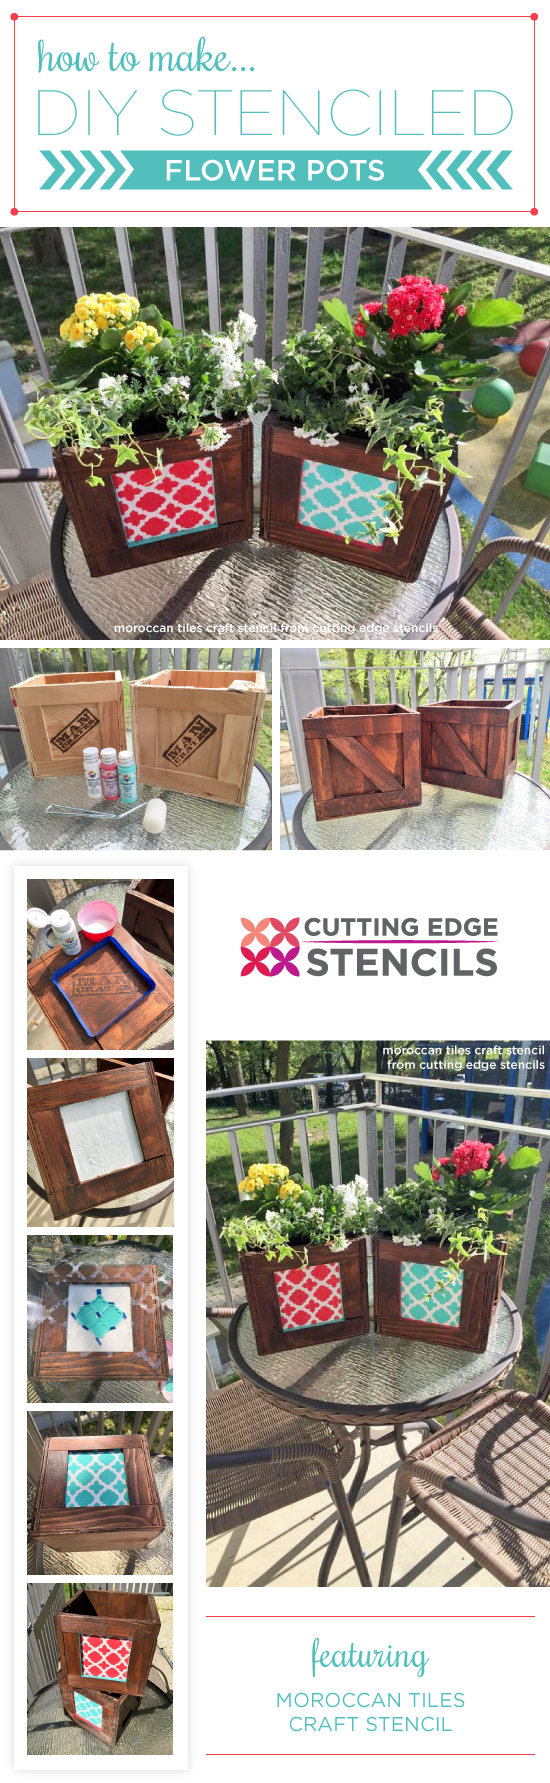 Cutting Edge Stencils shares a DIY tutorial on how to stencil wooden crate flower pots using the Moroccan Tiles Craft Stencil. http://www.cuttingedgestencils.com/moroccan-tiles-DIY-project-stencils.html